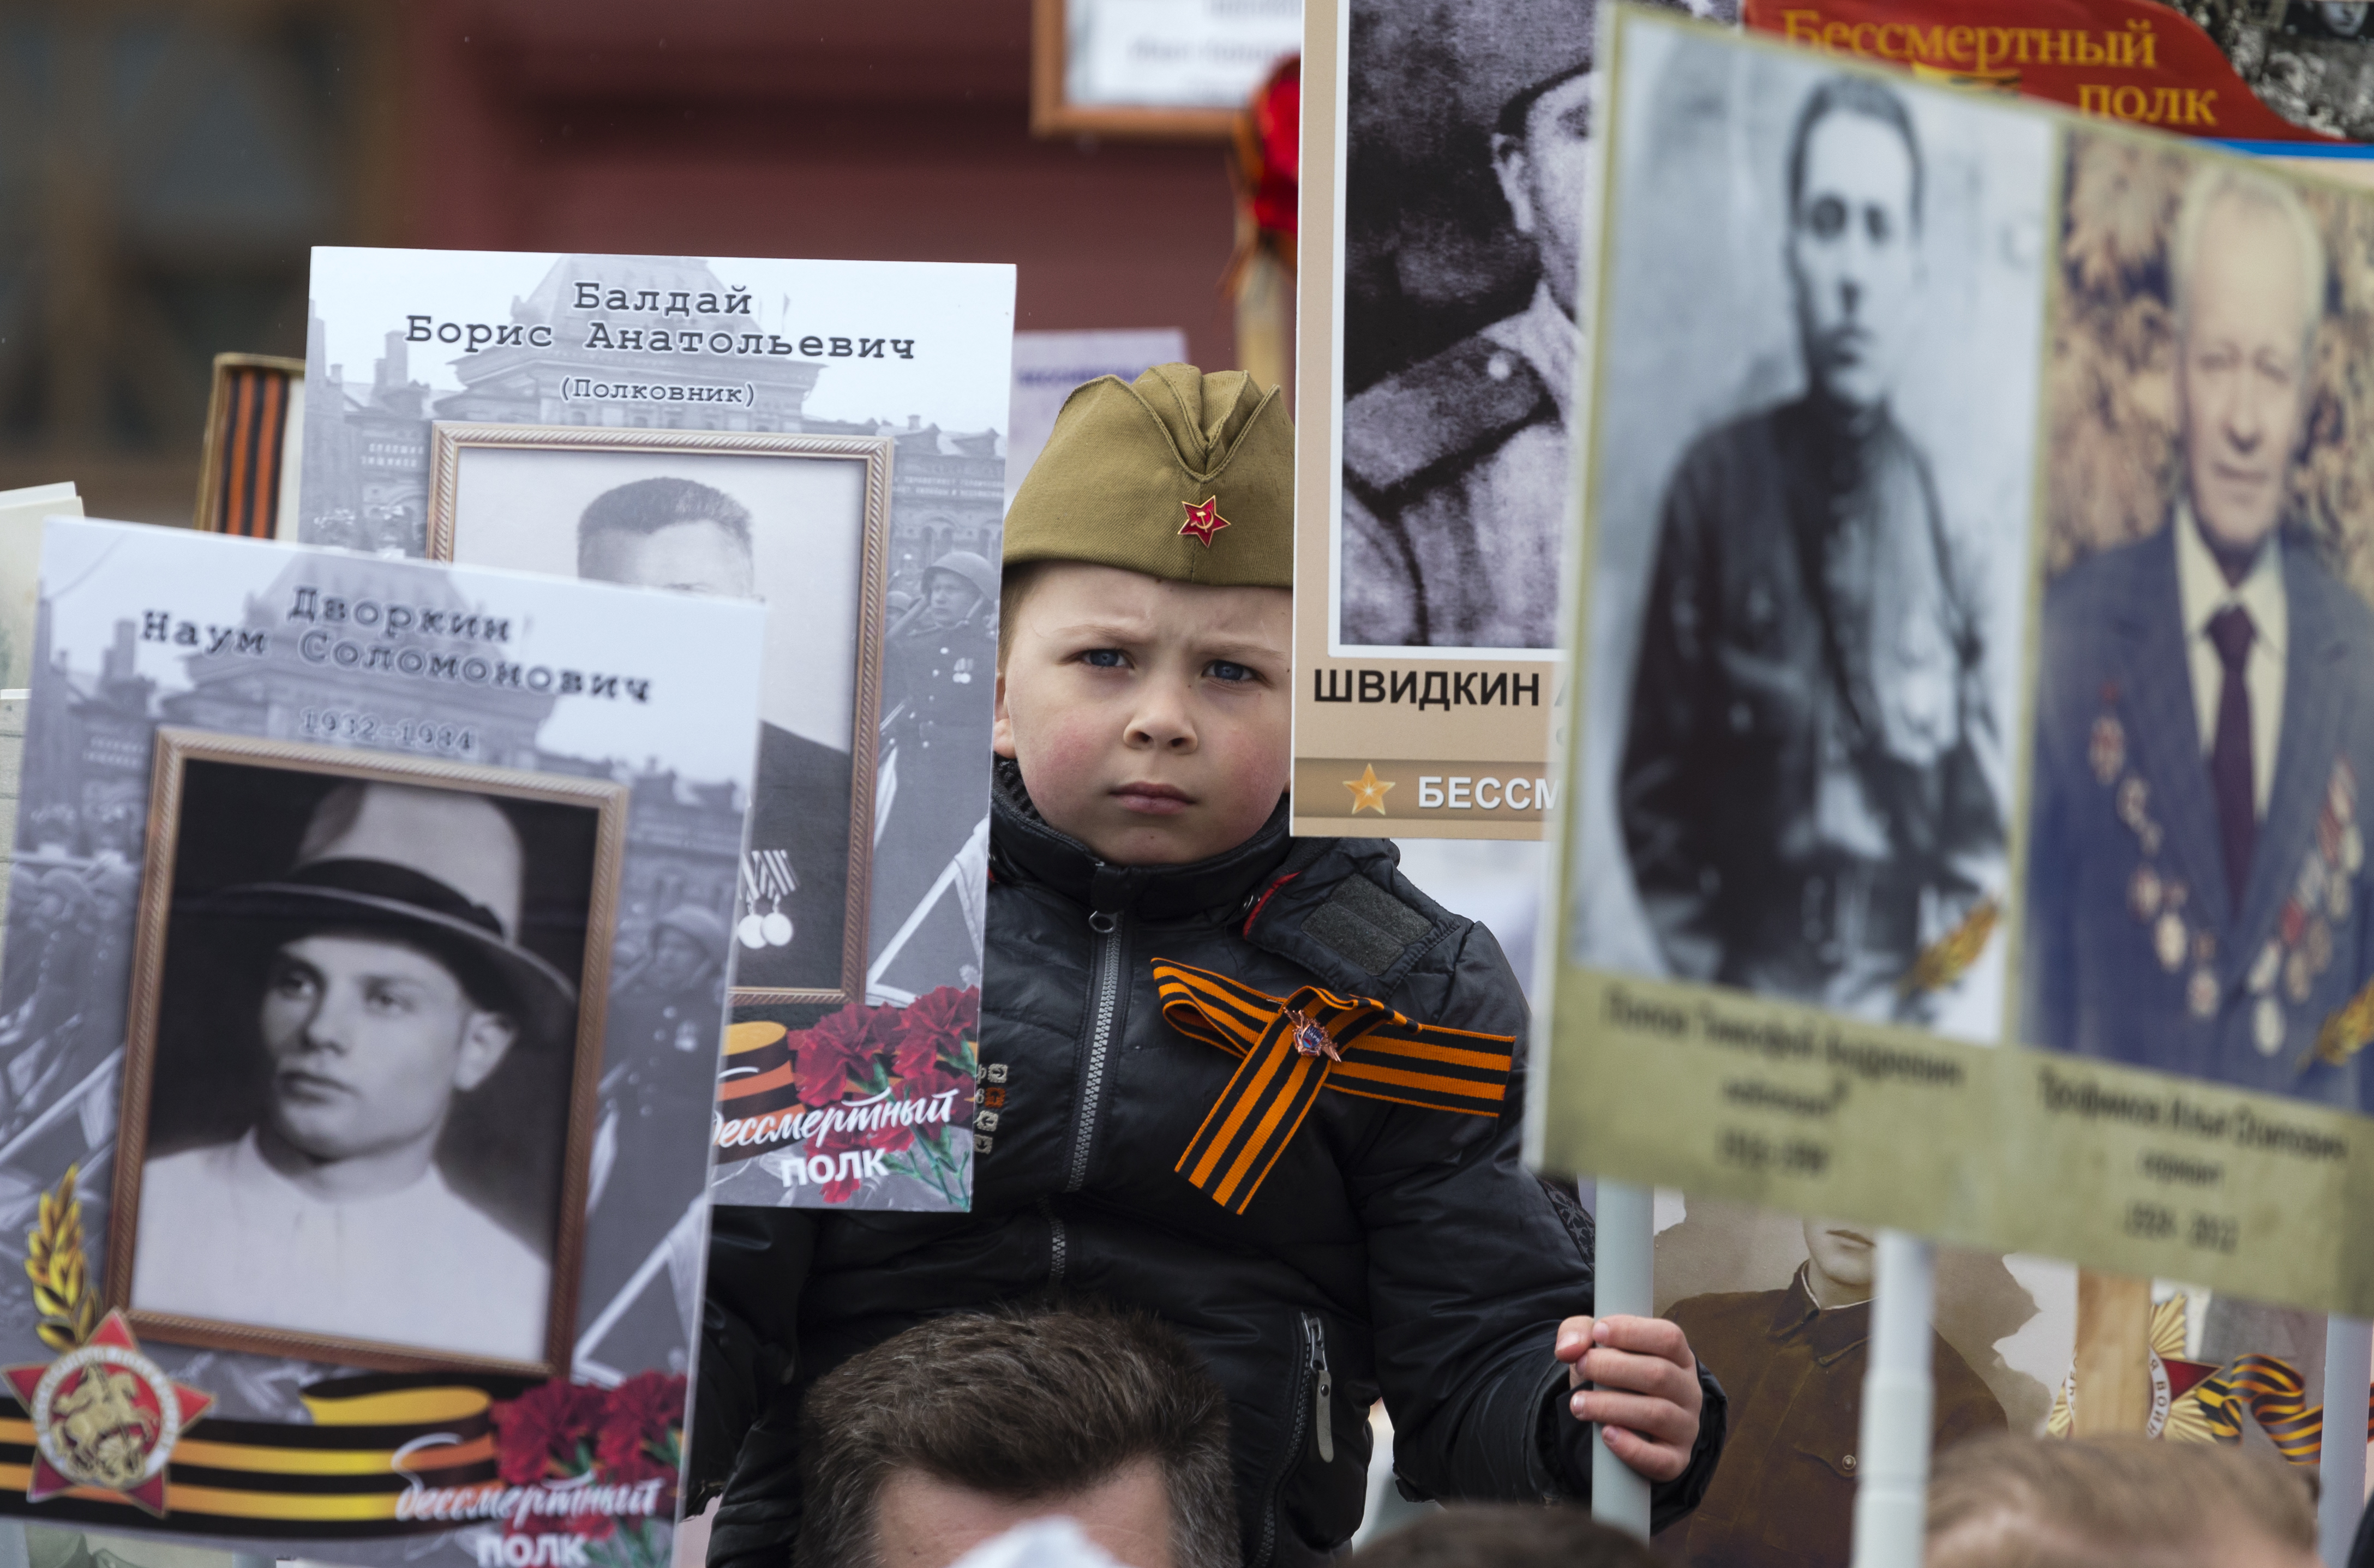 A Russian boy holds portraits of relatives who fought in World War II, Russian and Soviet flags, during the Immortal Regiment march at the Red Square in Moscow, Russia, Tuesday, May 9, 2017, celebrating 72 years since the end of WWII and the defeat of Nazi Germany. (AP Photo/Ivan Sekretarev)